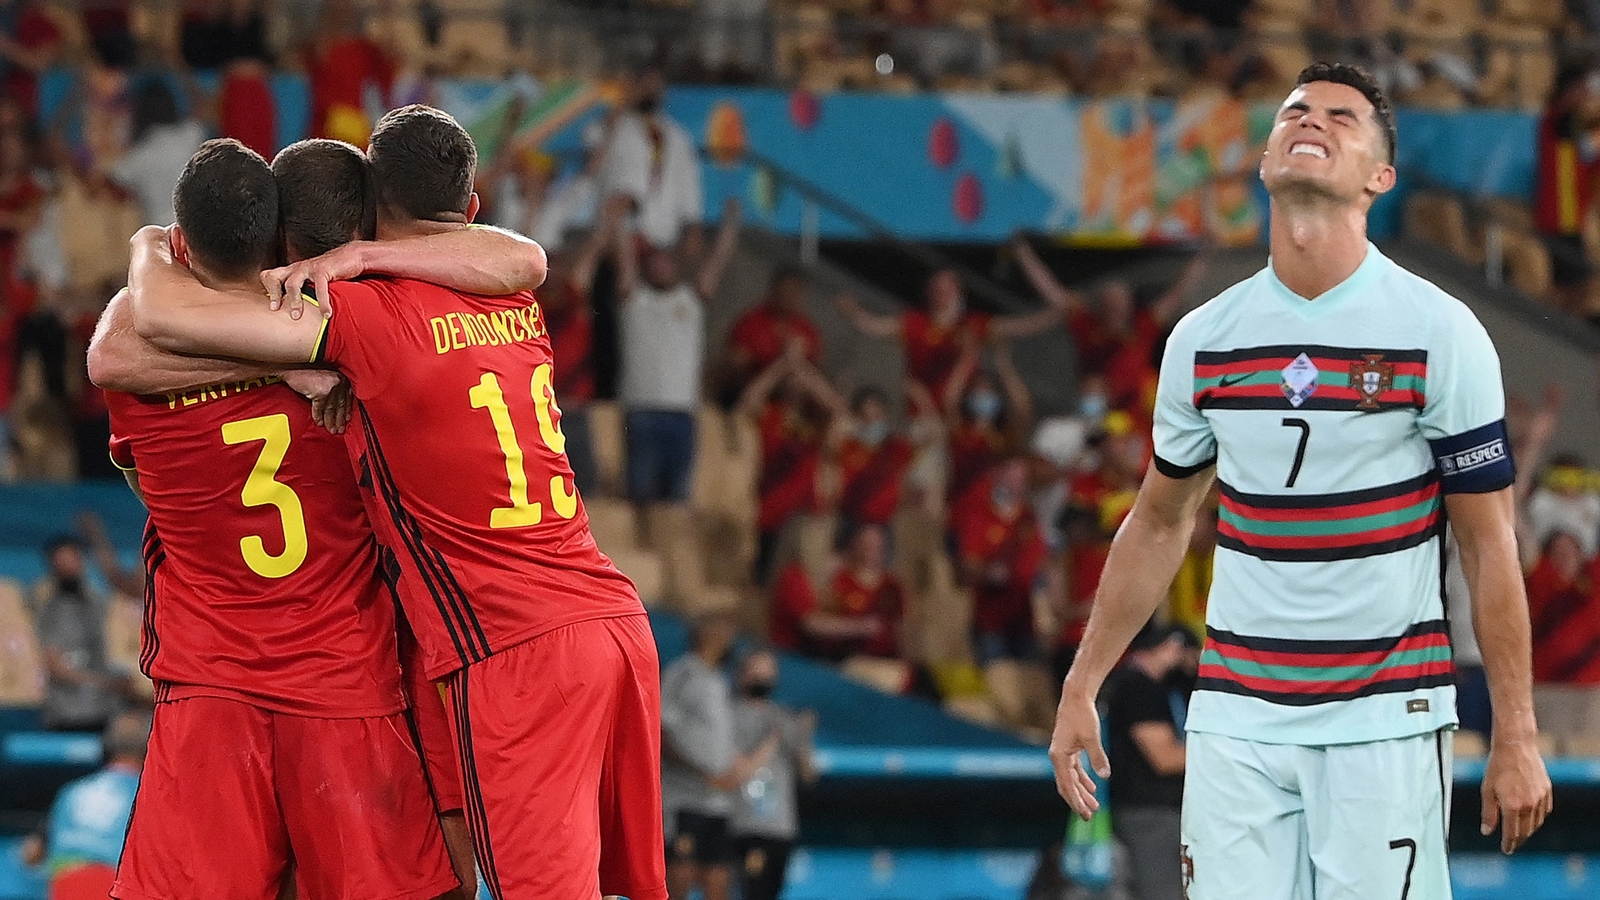 Heartbreaking': Twitterati react to Portugal's exit from Euro 2020 after losing to Belgium